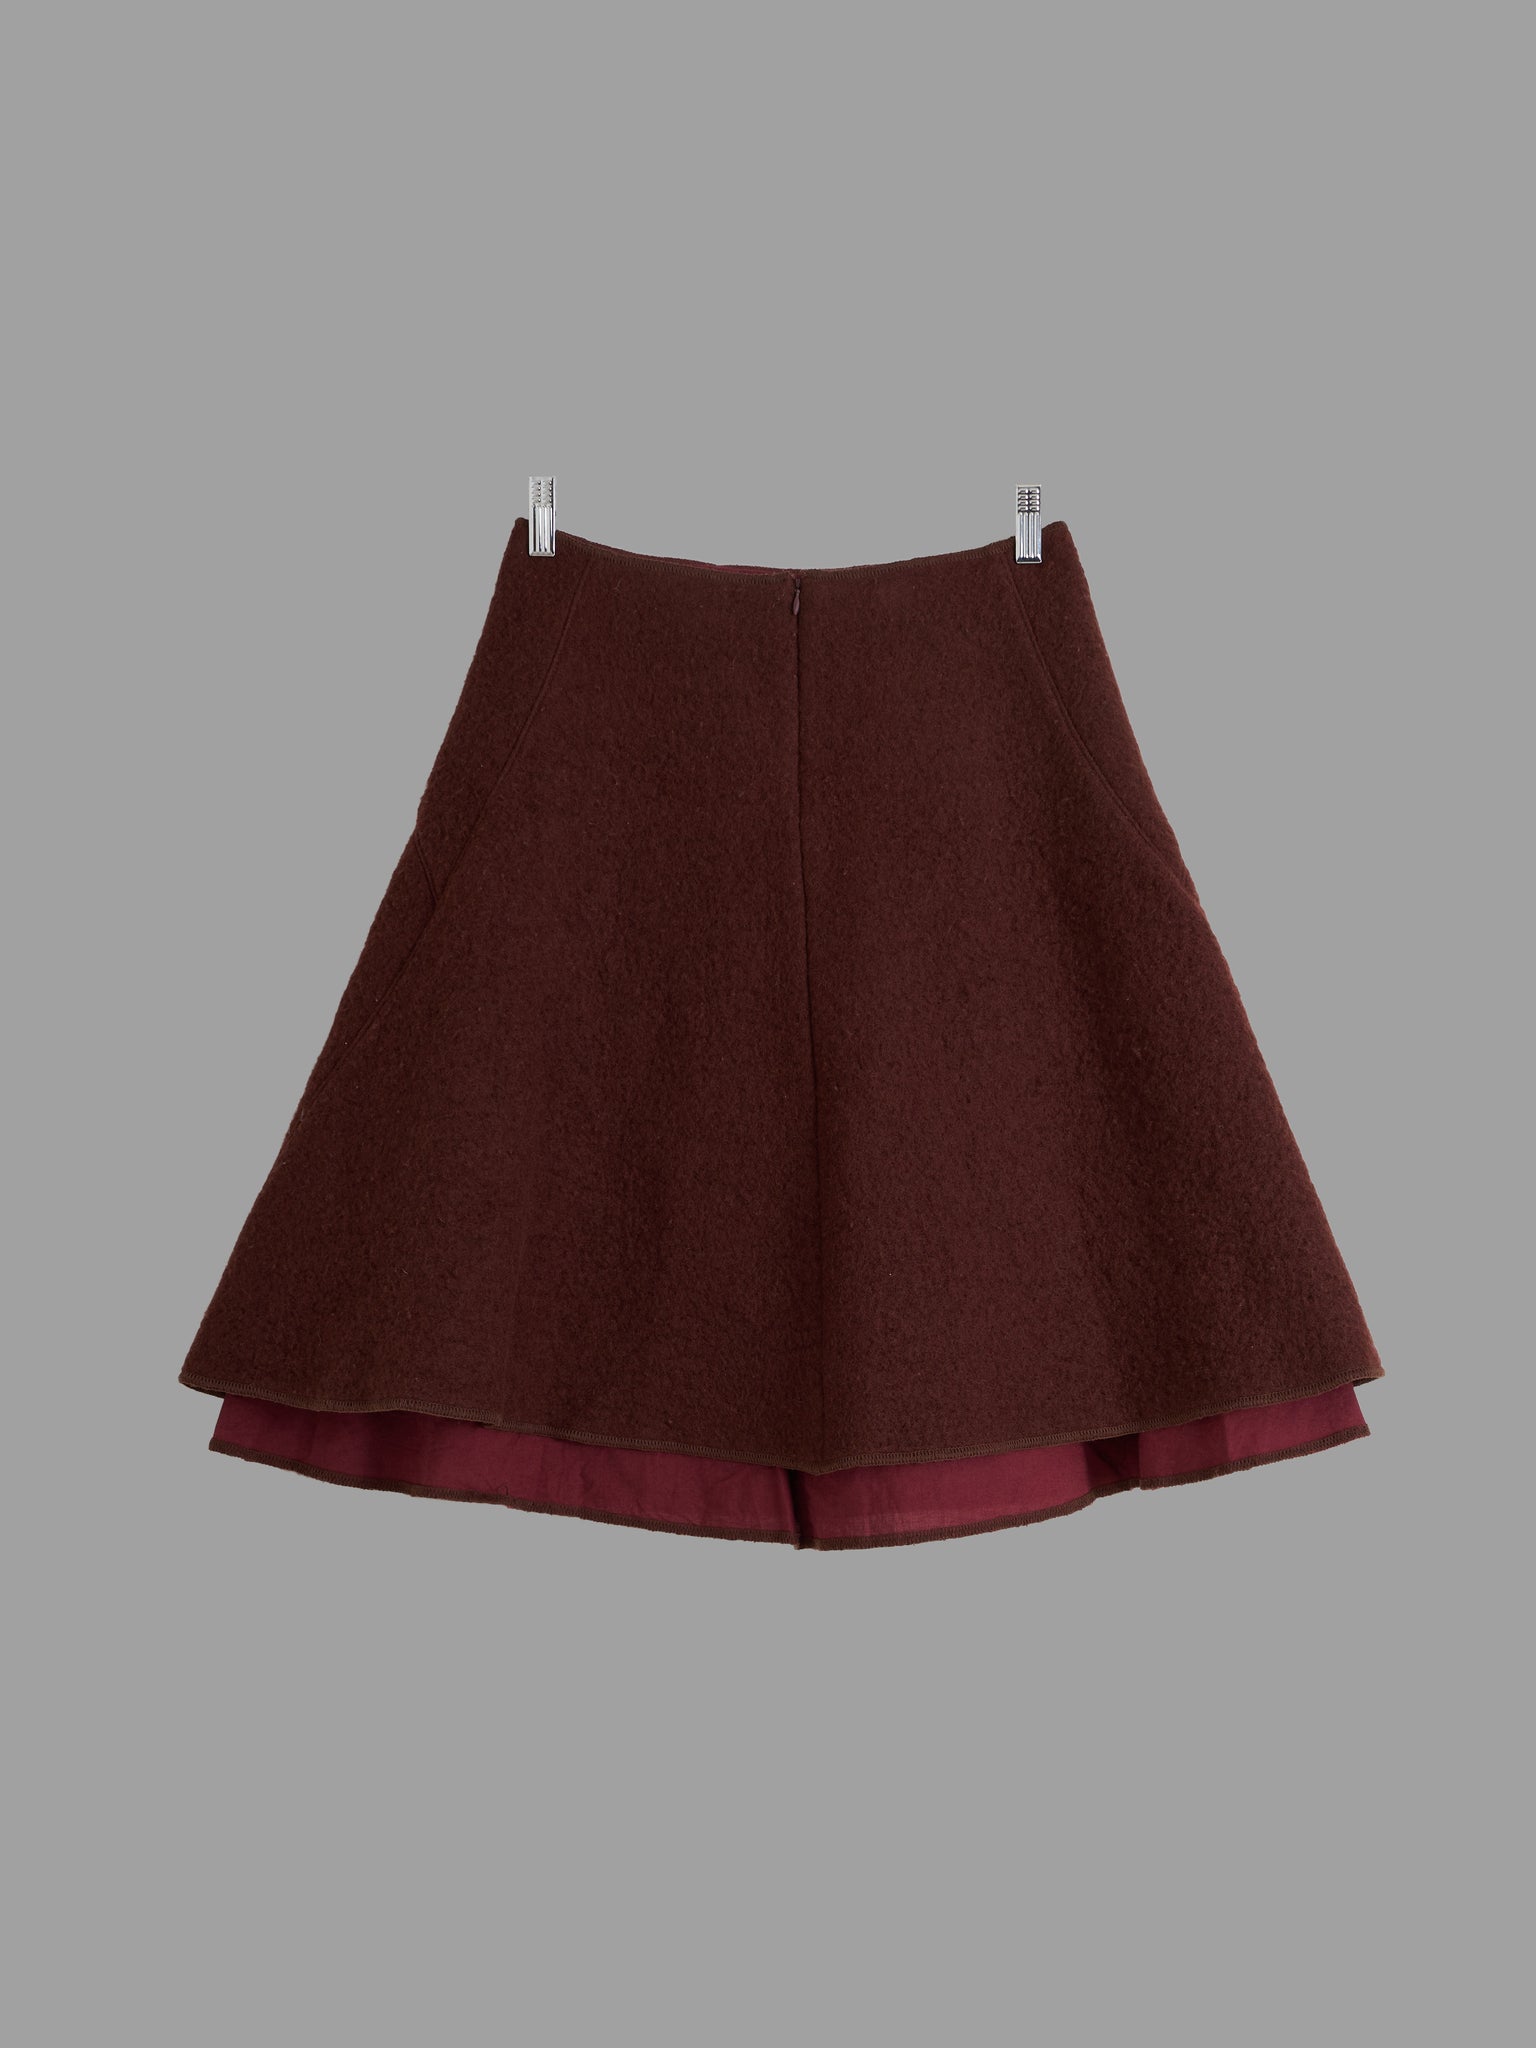 Mandarina Duck 1990s brown boiled wool exposed lining a-line skirt - size 40